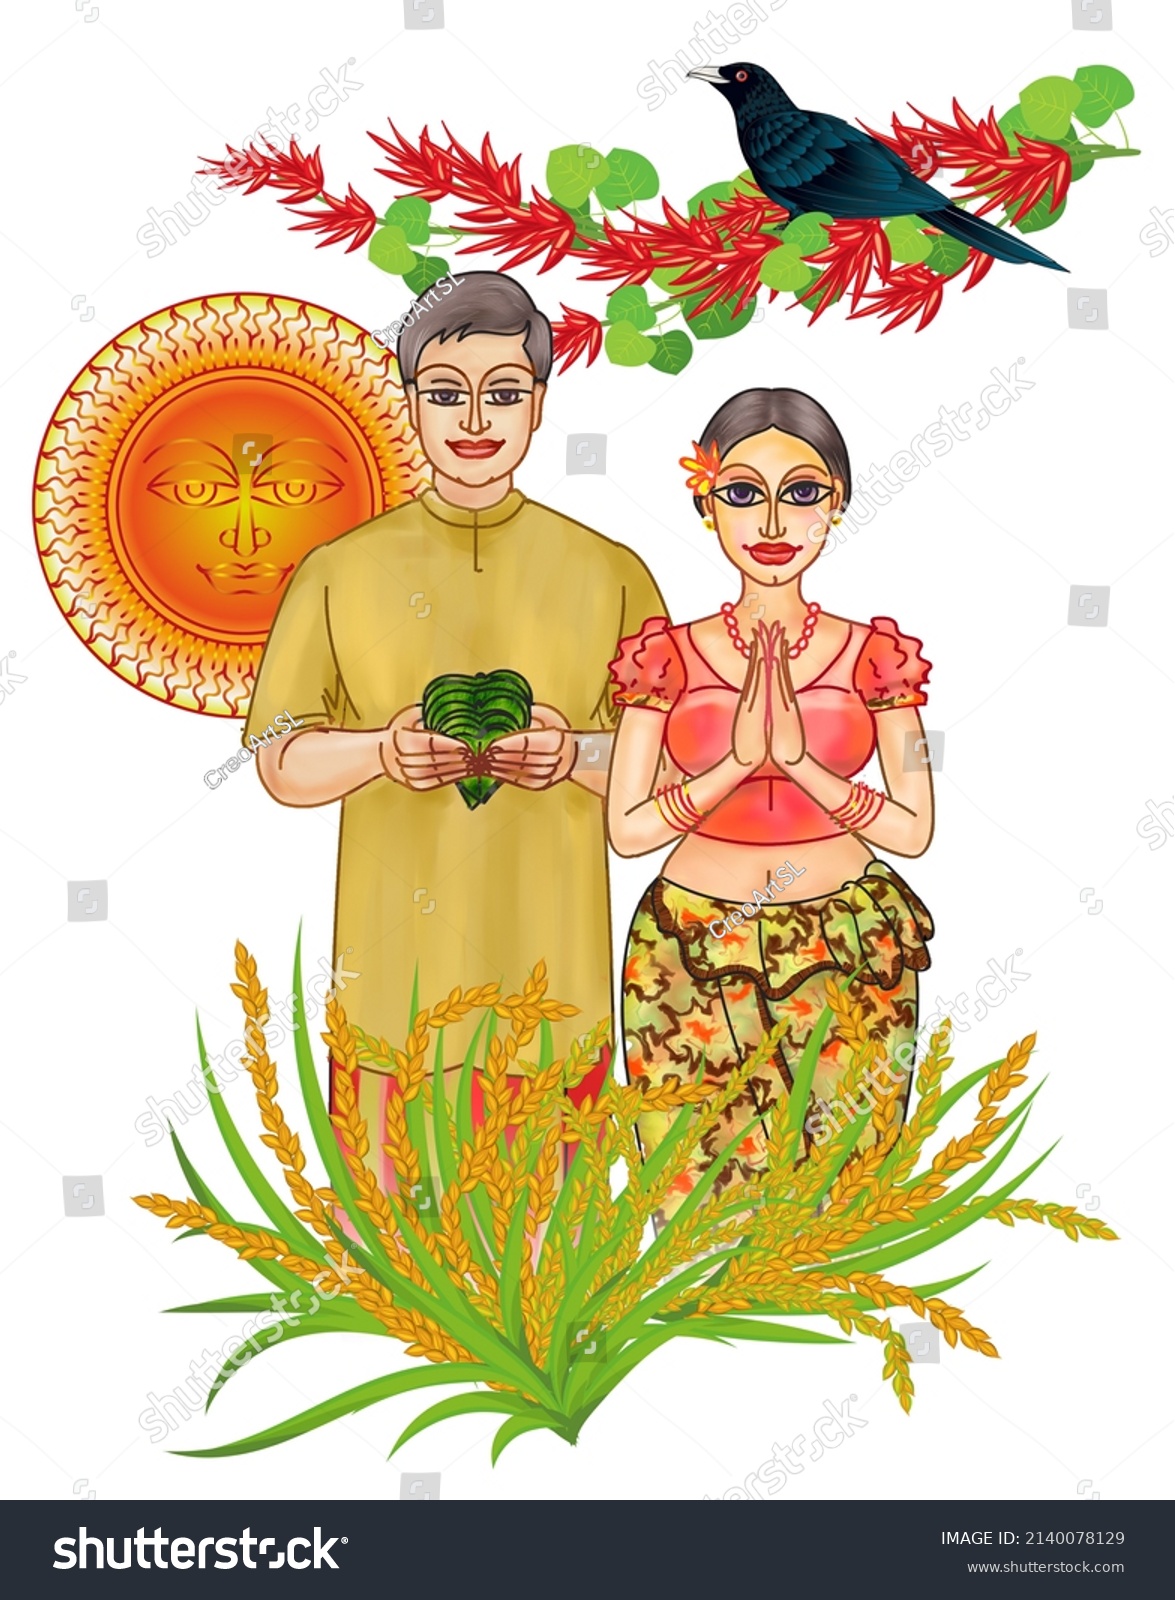 Sinhala new year greetings Images, Stock Photos & Vectors Shutterstock